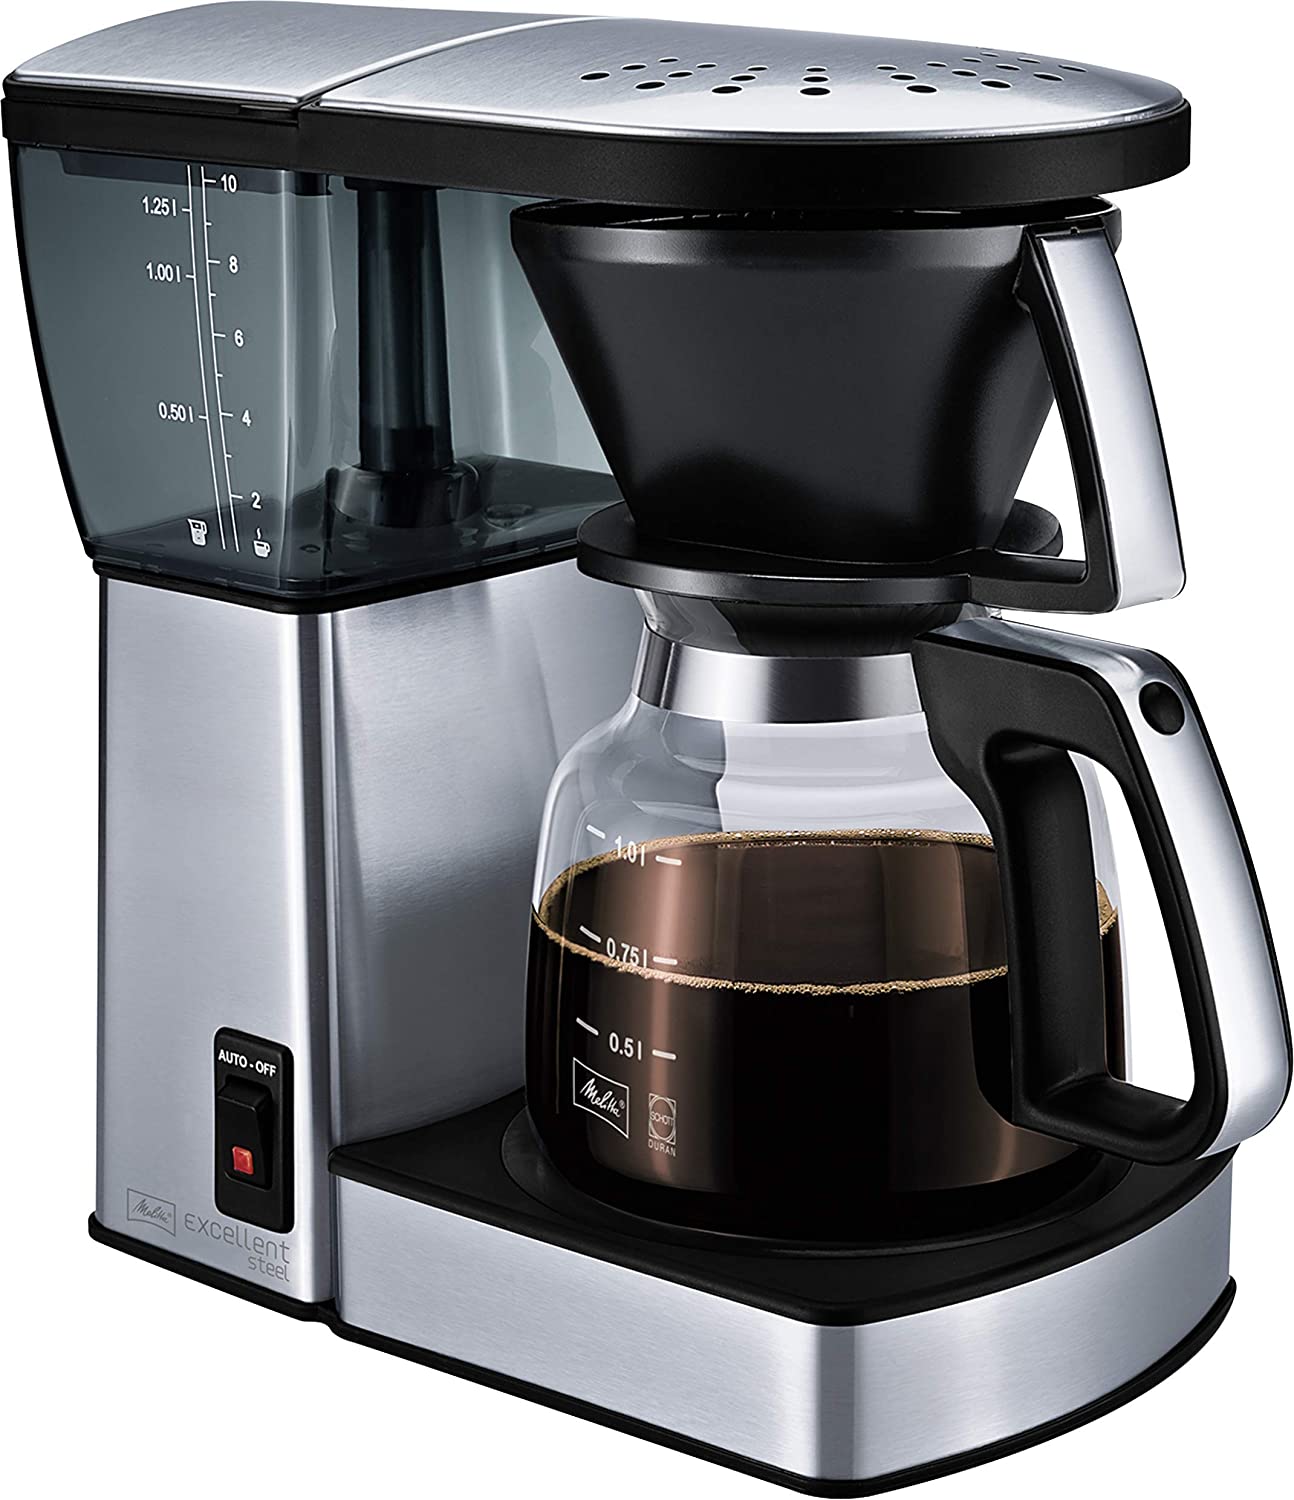 Melitta Excellent 4.0 Electric Coffee Maker - High Quality Coffee Preparation for Everyday Use and Party - Black, Stainless Steel